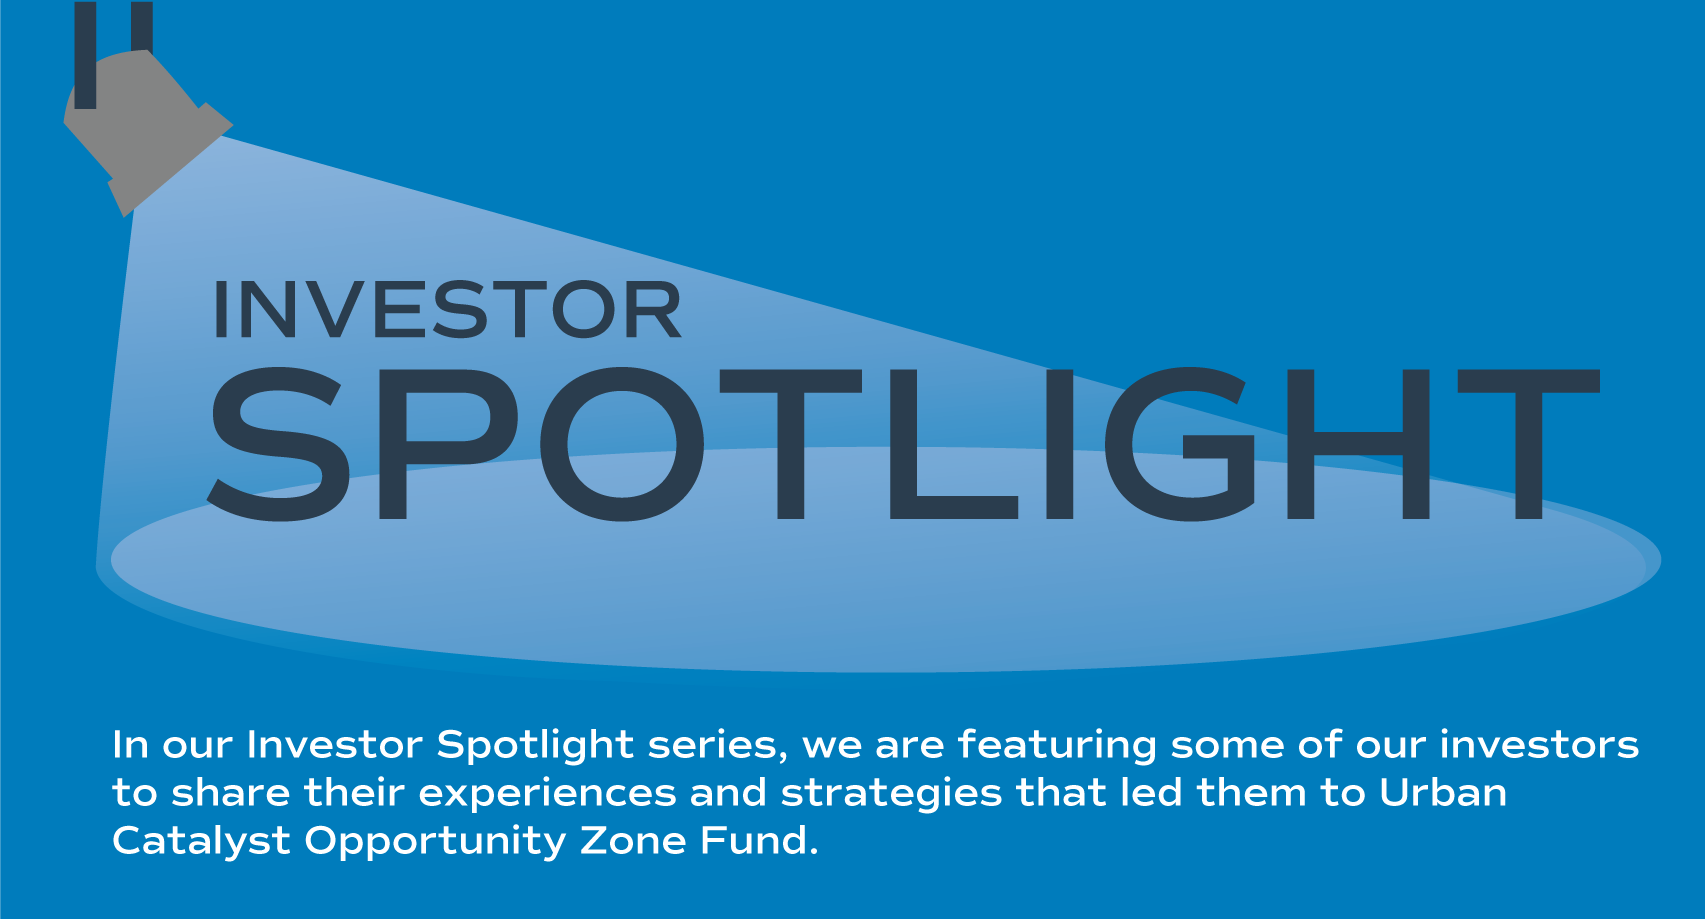 Investor Spotlight: Claire, who chose an OZ Fund over a 1031 Exchange